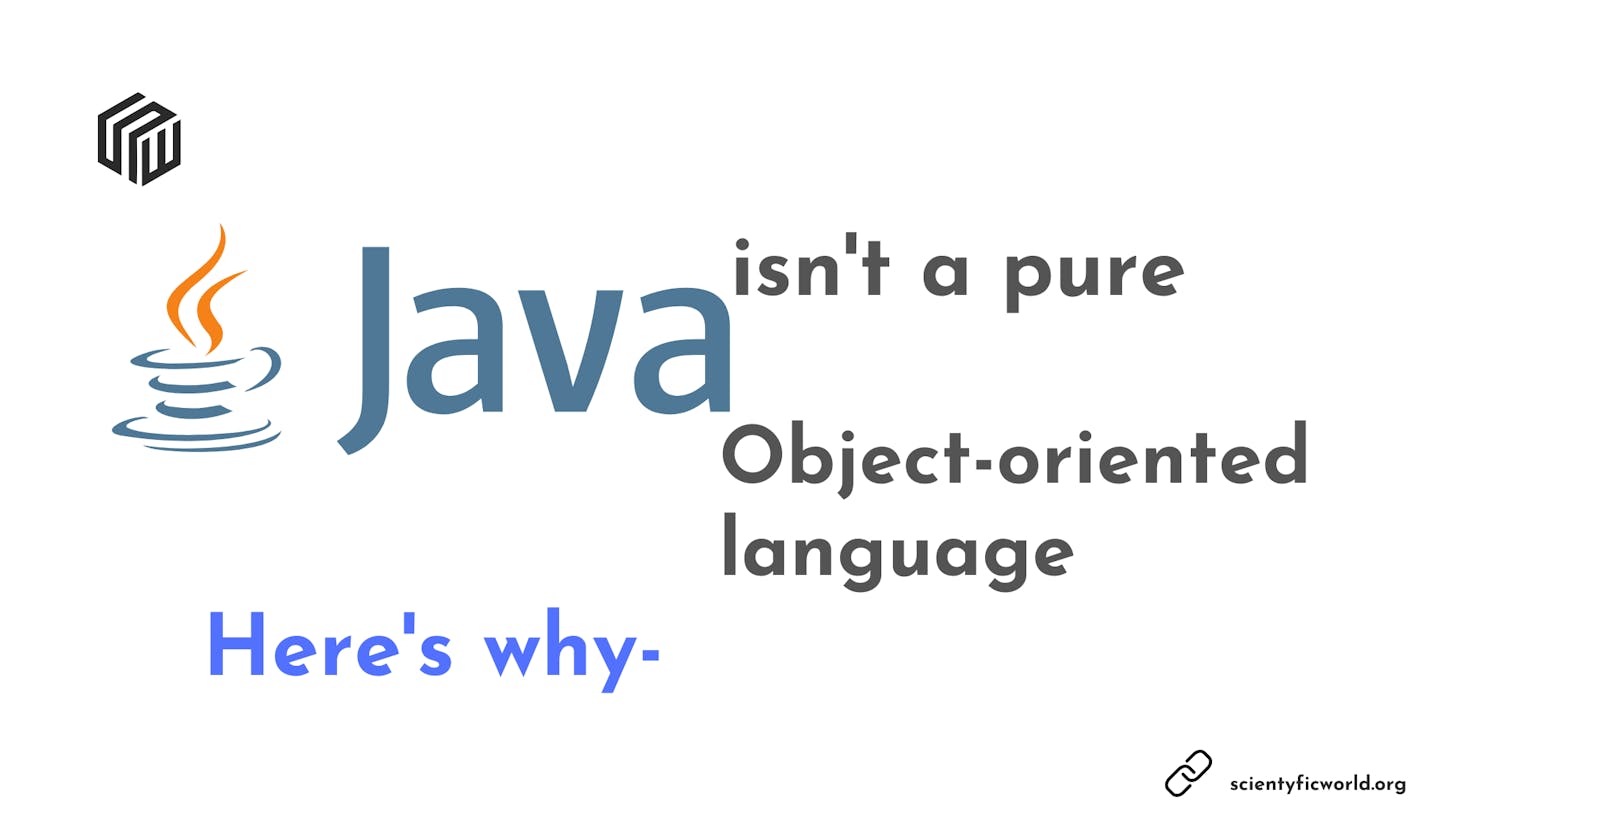 Why Java isn't purely object-oriented?